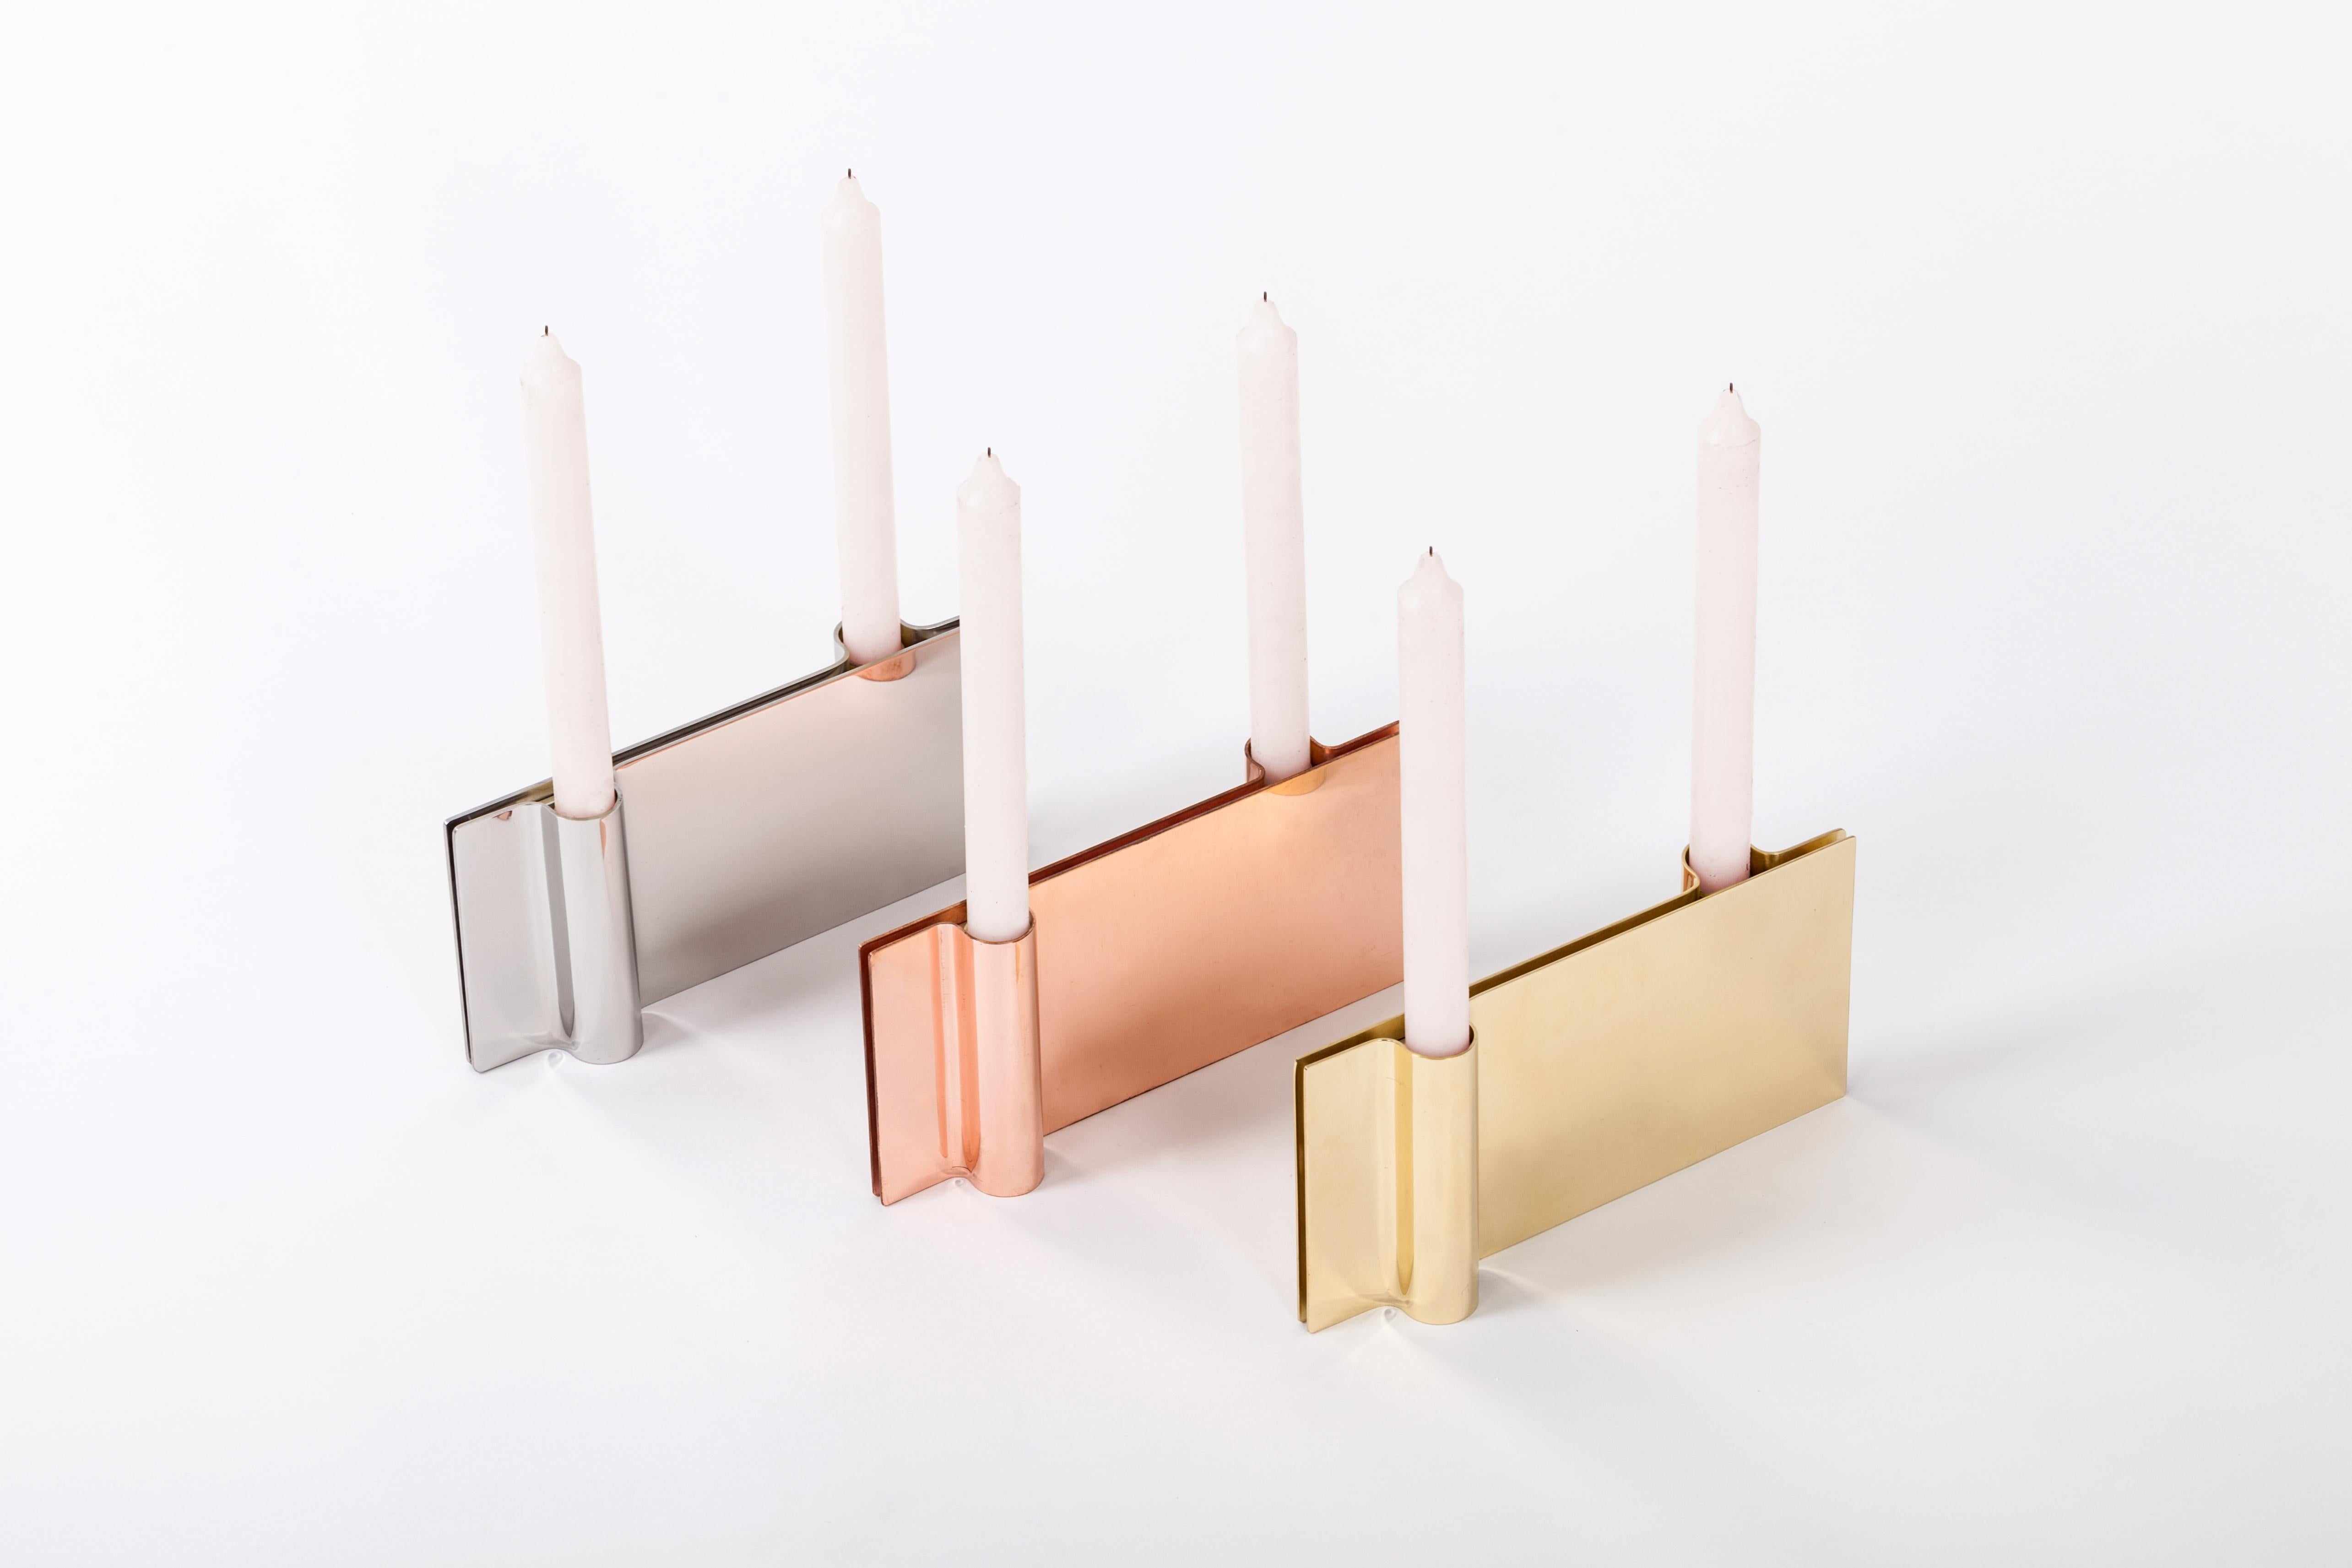 Set of 3 Folio Candle Holders by Mingardo
Dimensions: D22.5 x W2.2 x H11 cm 
Materials: Polished natural copper, Polished natural brass, Polished natural stainless steel.
Weight: 4.5 kg

Folio is a modern candle’s holder, very minimalistic in